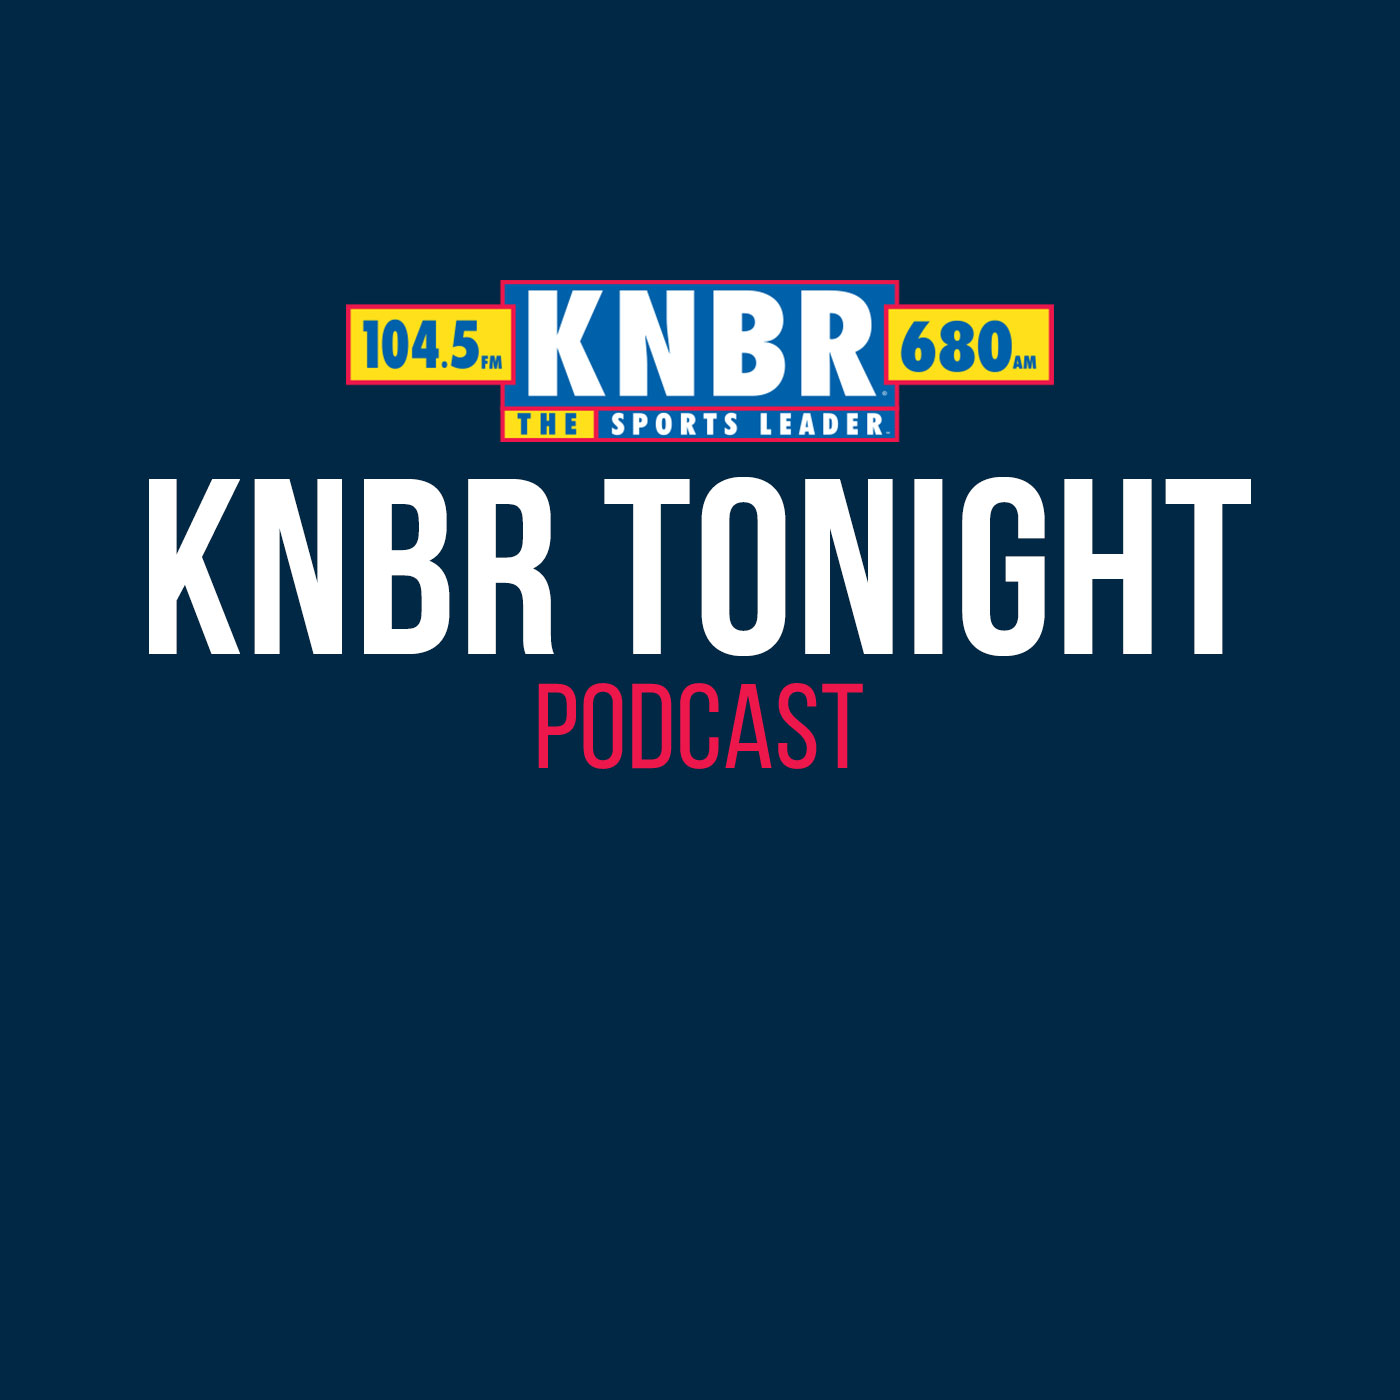 12-14 Scott Reiss joins KNBR Tonight to discuss his new book "Where they were then: Sportscasters", which describes 15 broadcasters journeys in the sports media industry